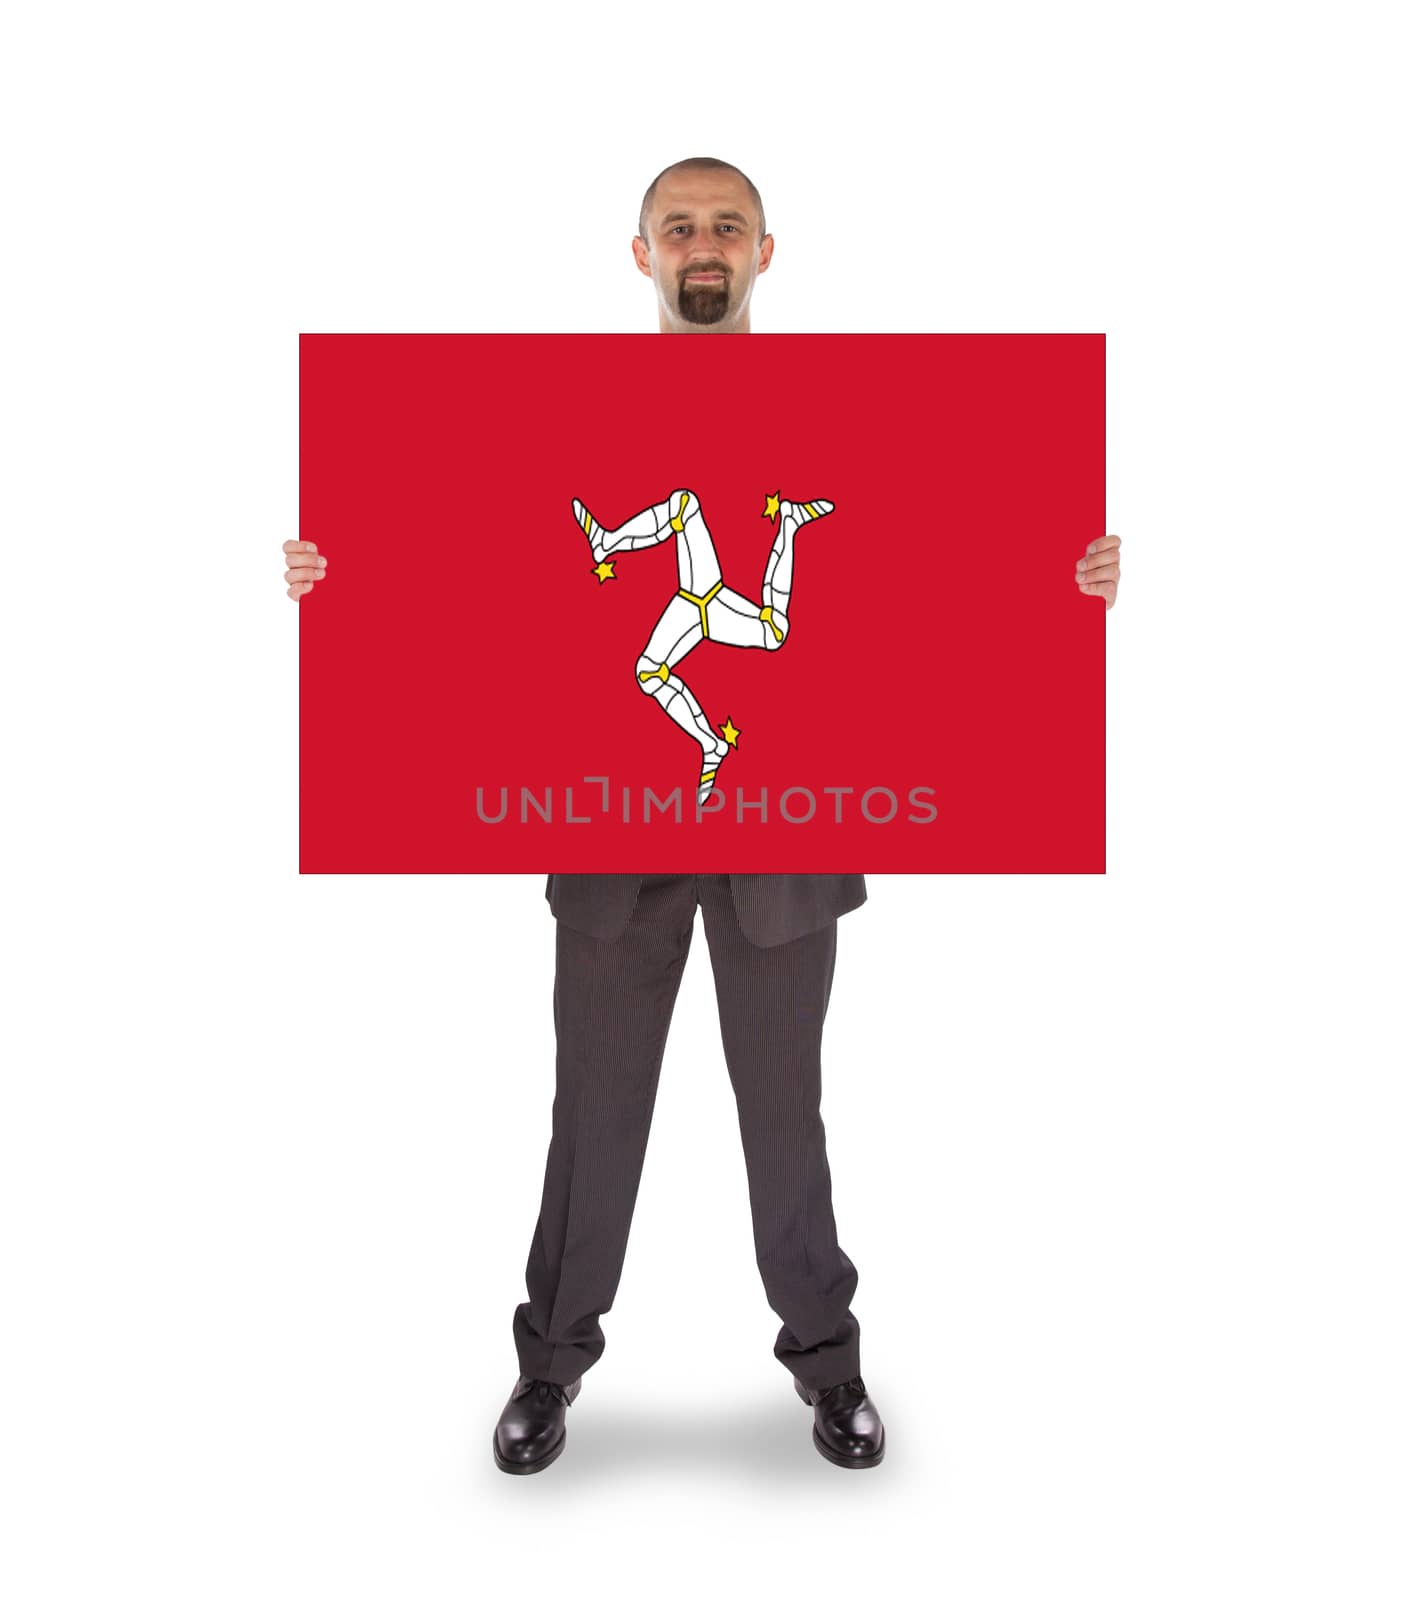 Smiling businessman holding a big card, flag of Isle of Man, isolated on white